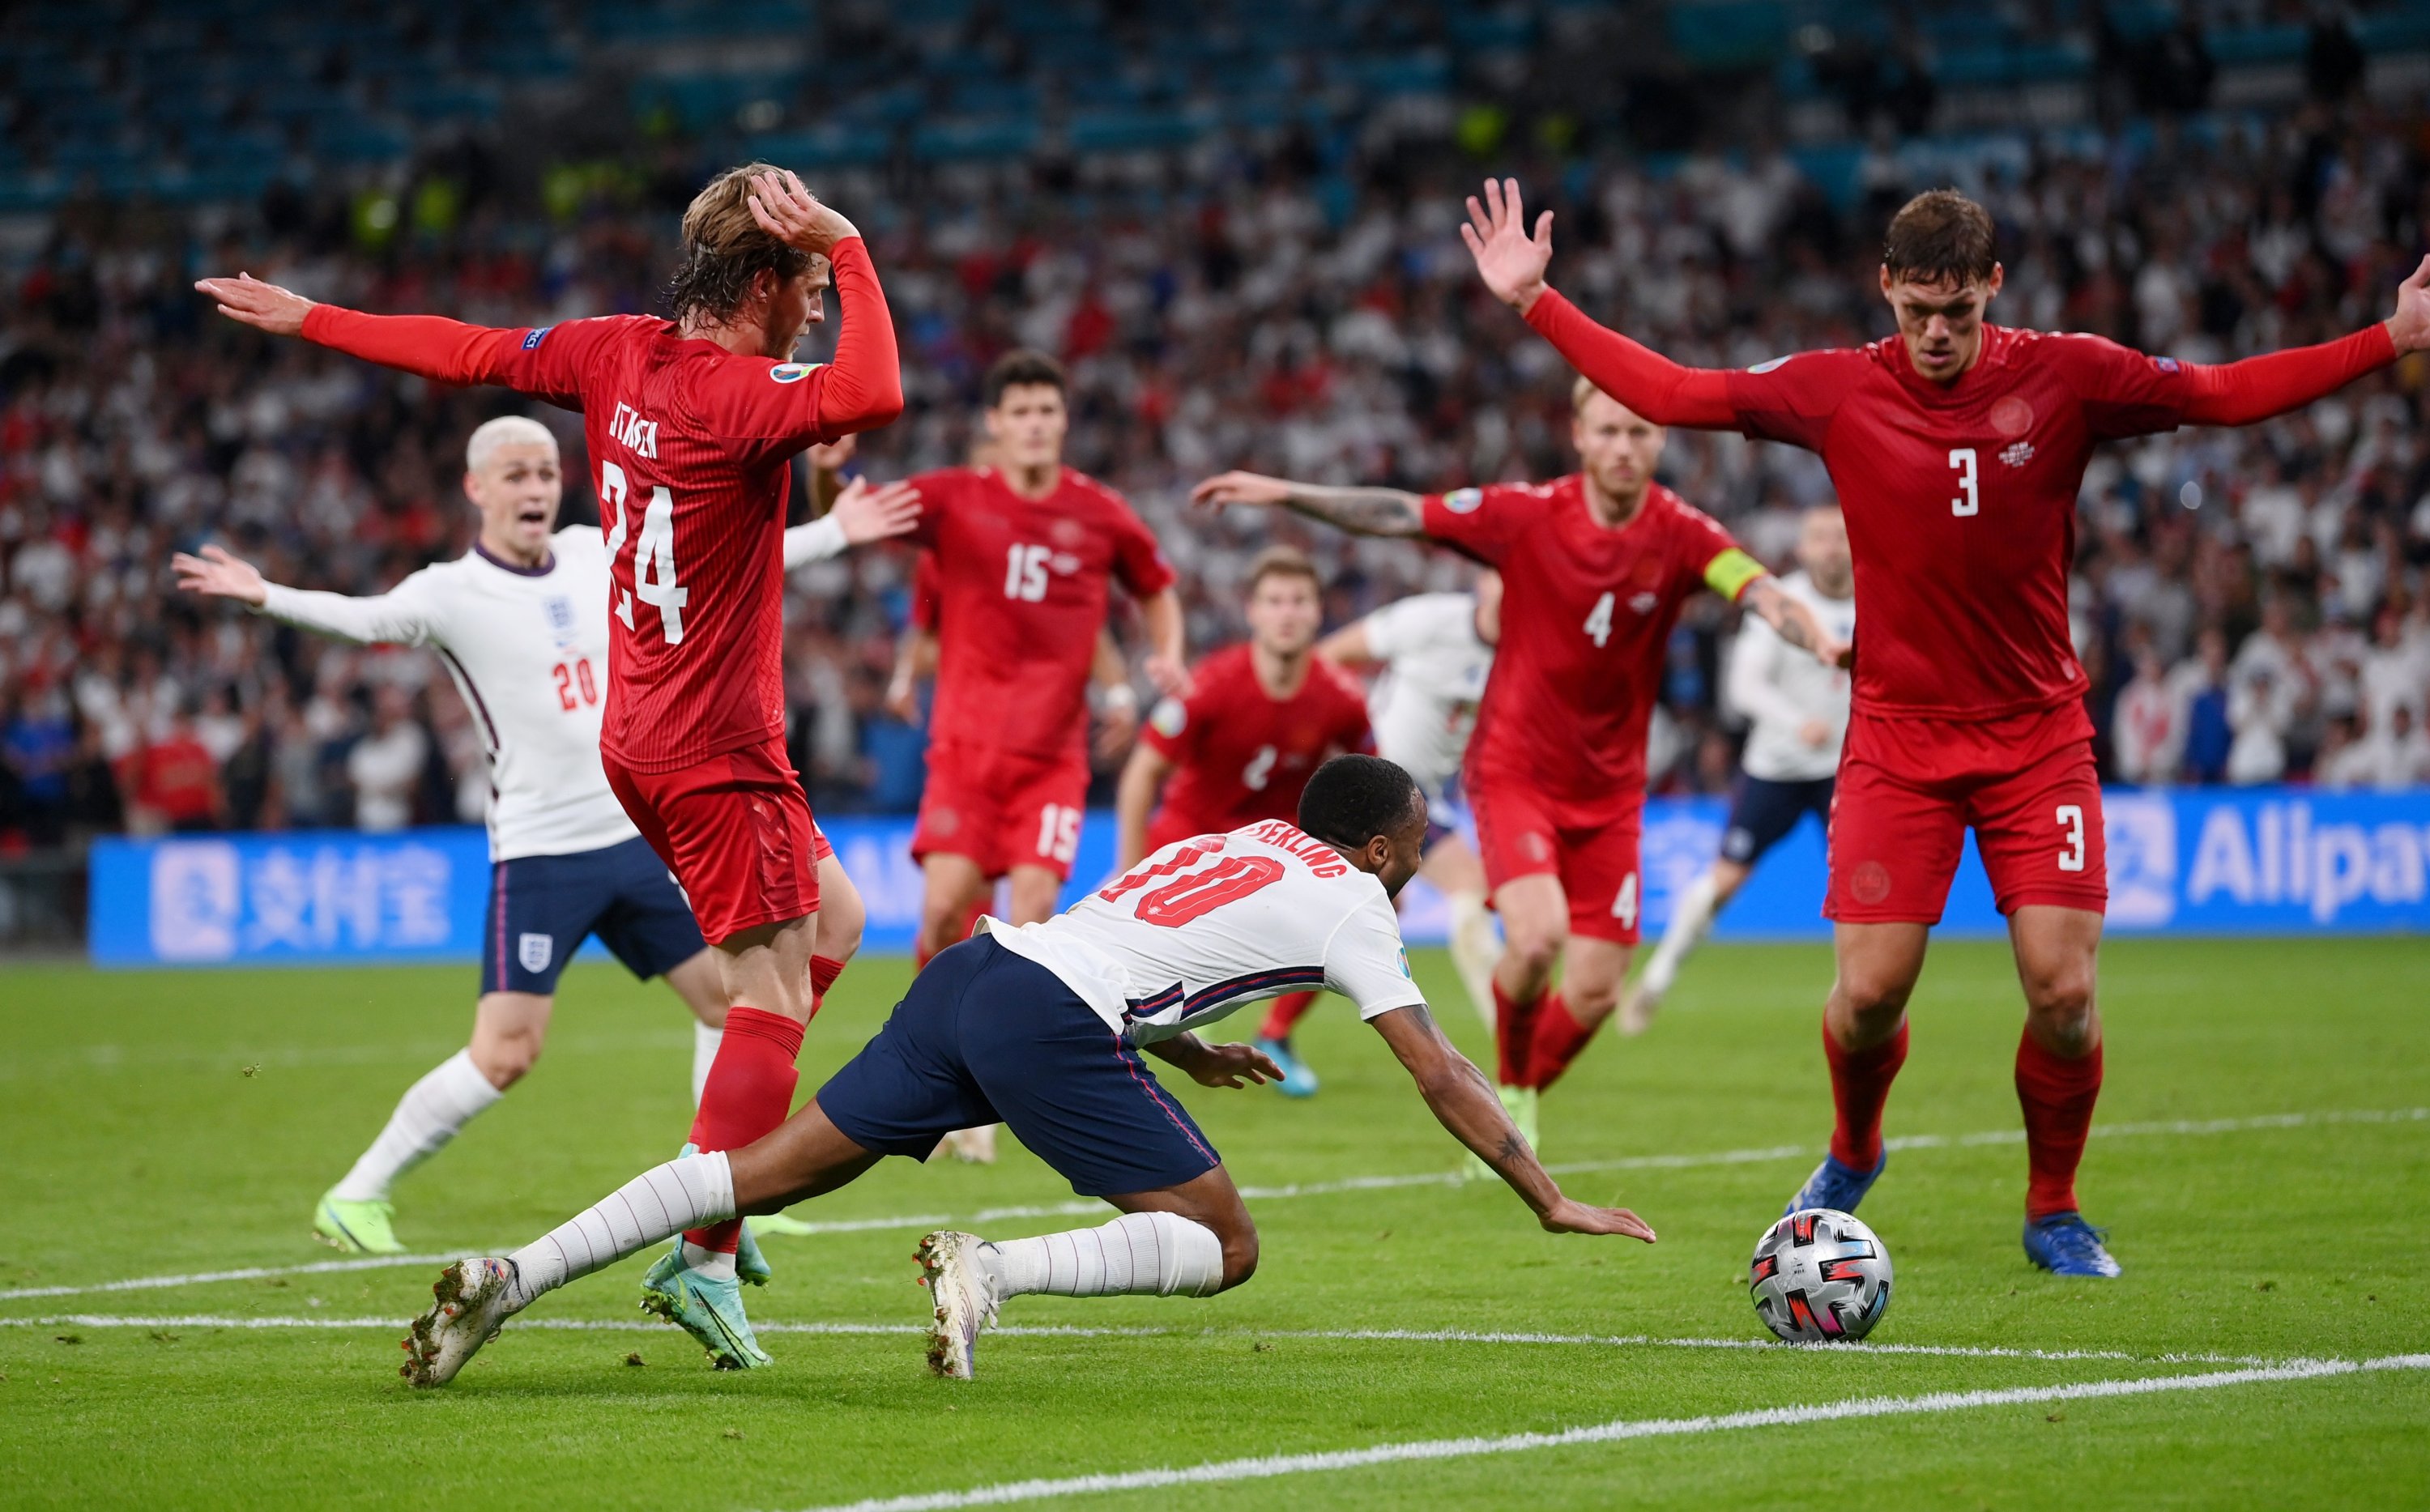 Stop lecturing: England faces diving criticism after 'cheap' penalty |  Daily Sabah